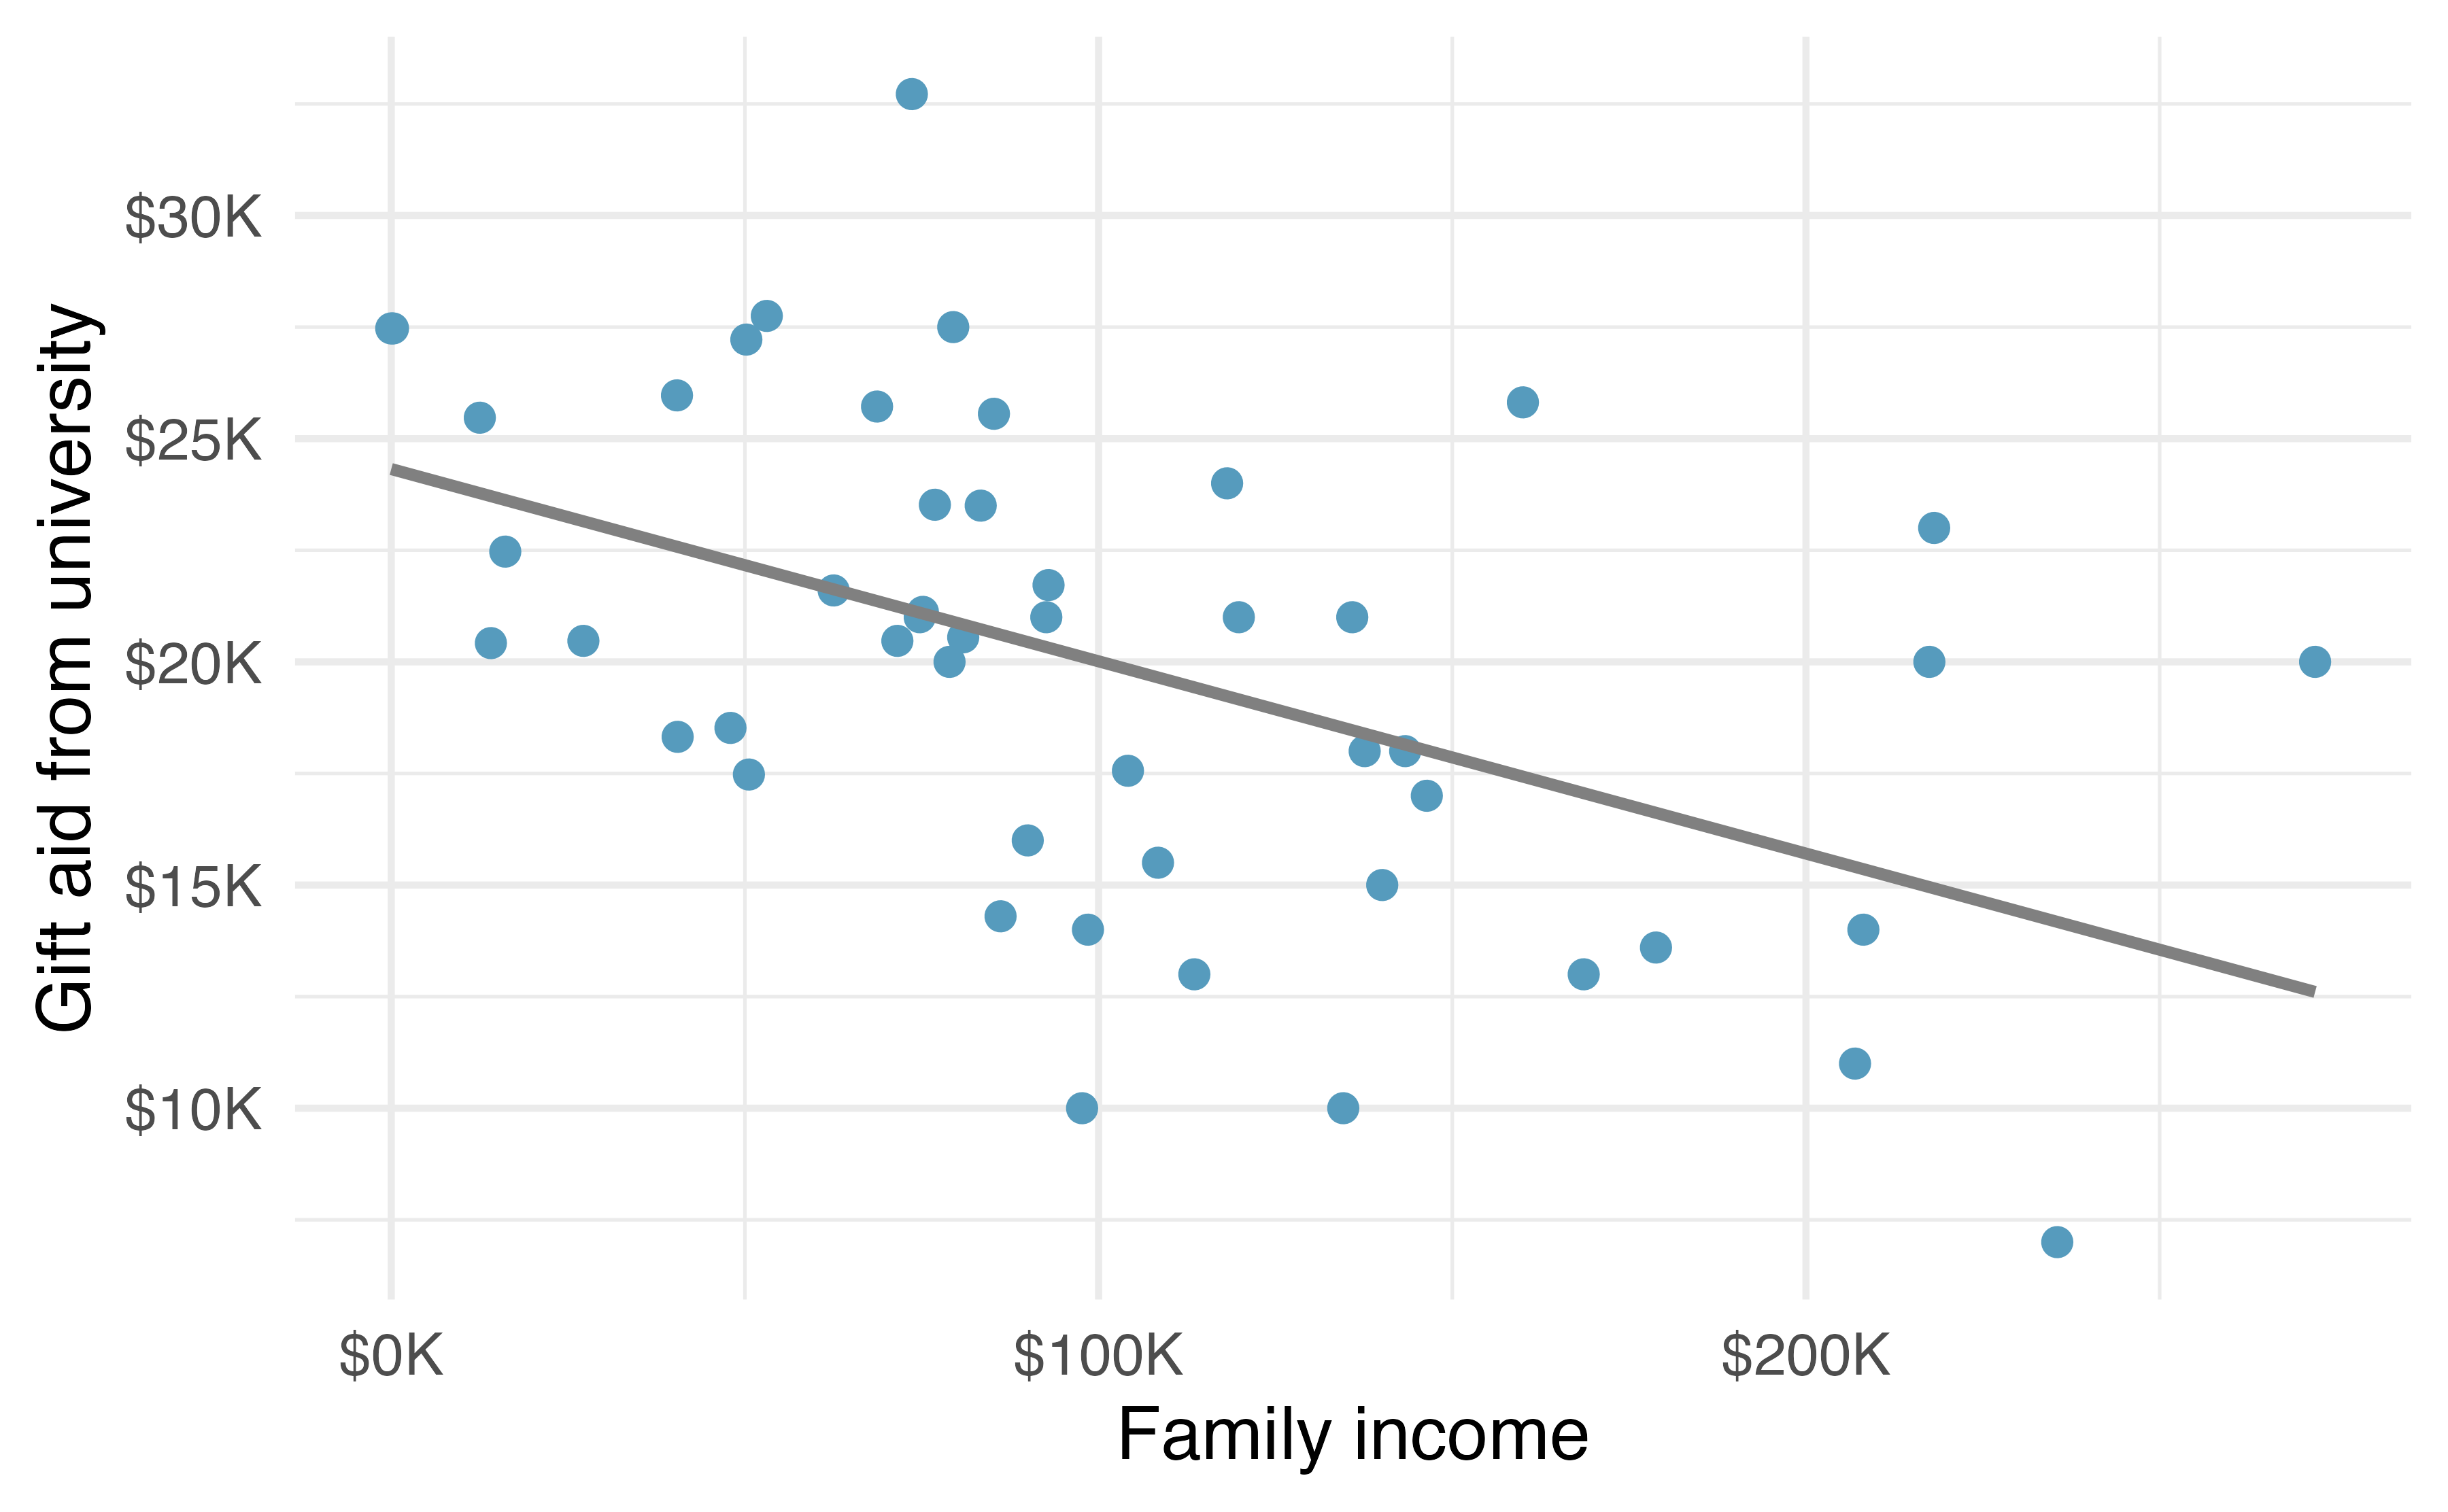 Scatterplot with family income on the x-axis and gift aid on the y-axis.  The relationship is moderate negative and linear.